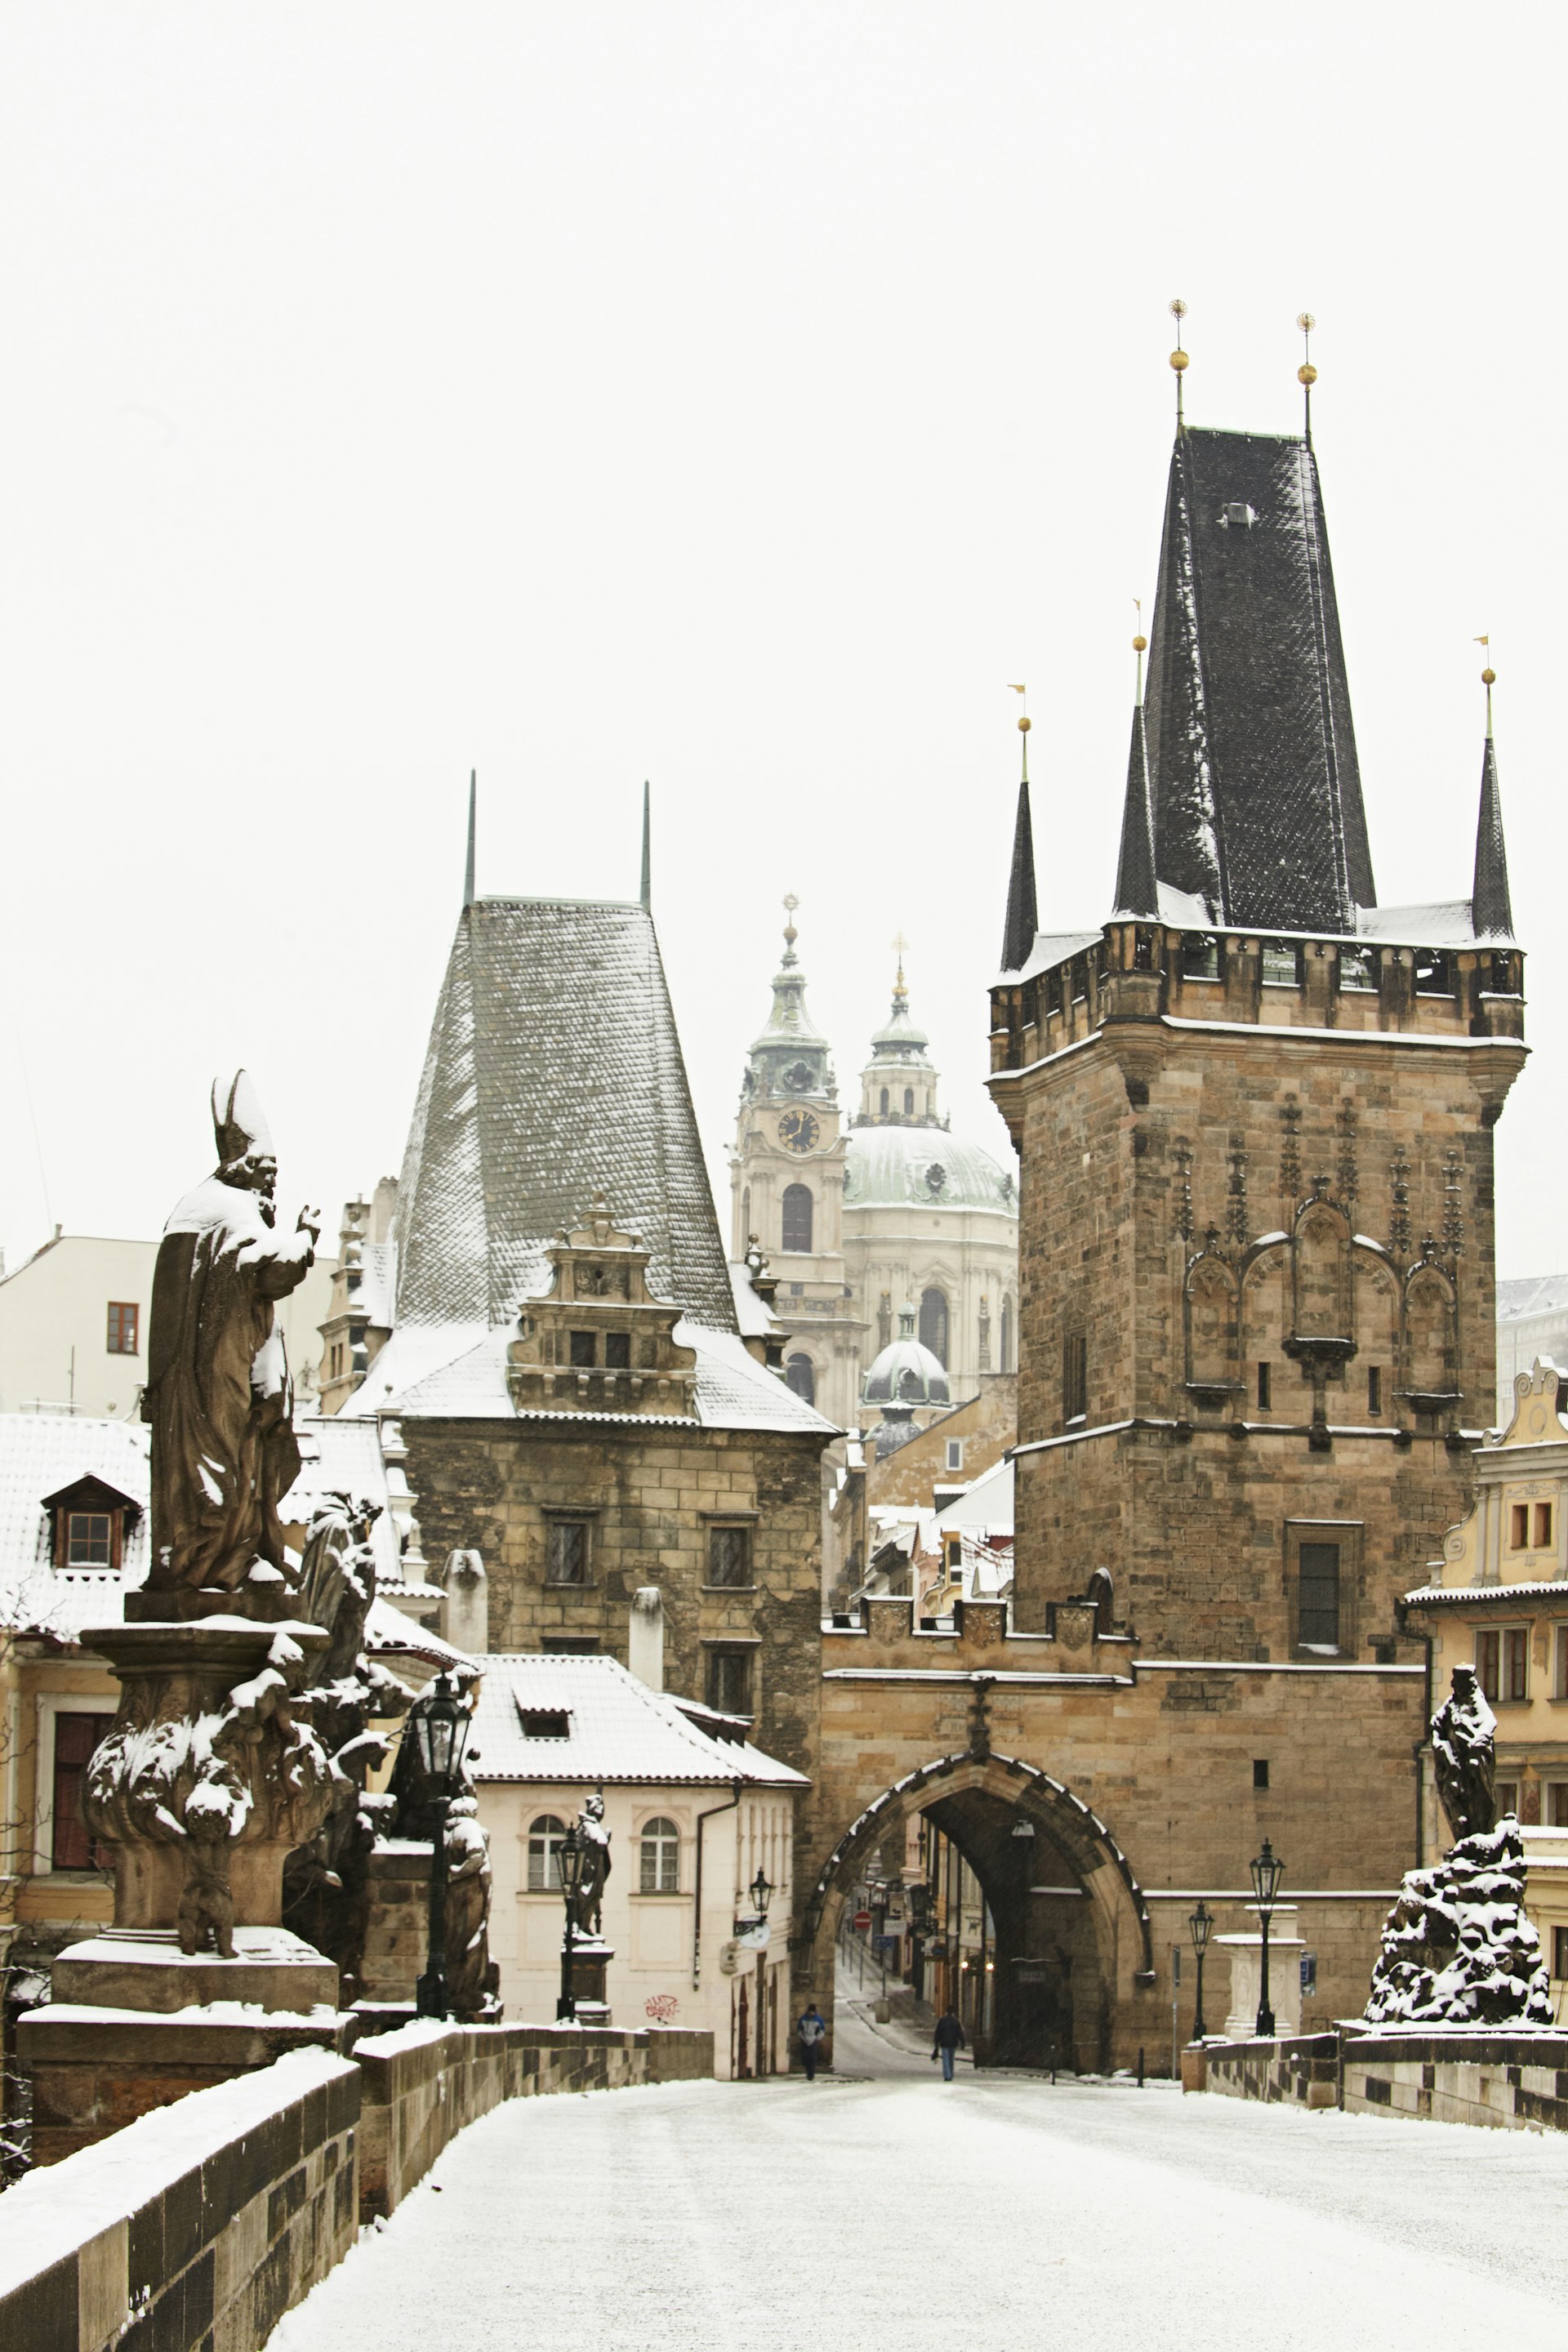 A view from the snow-covered Charles Bridge toward Malá Strana in Prague